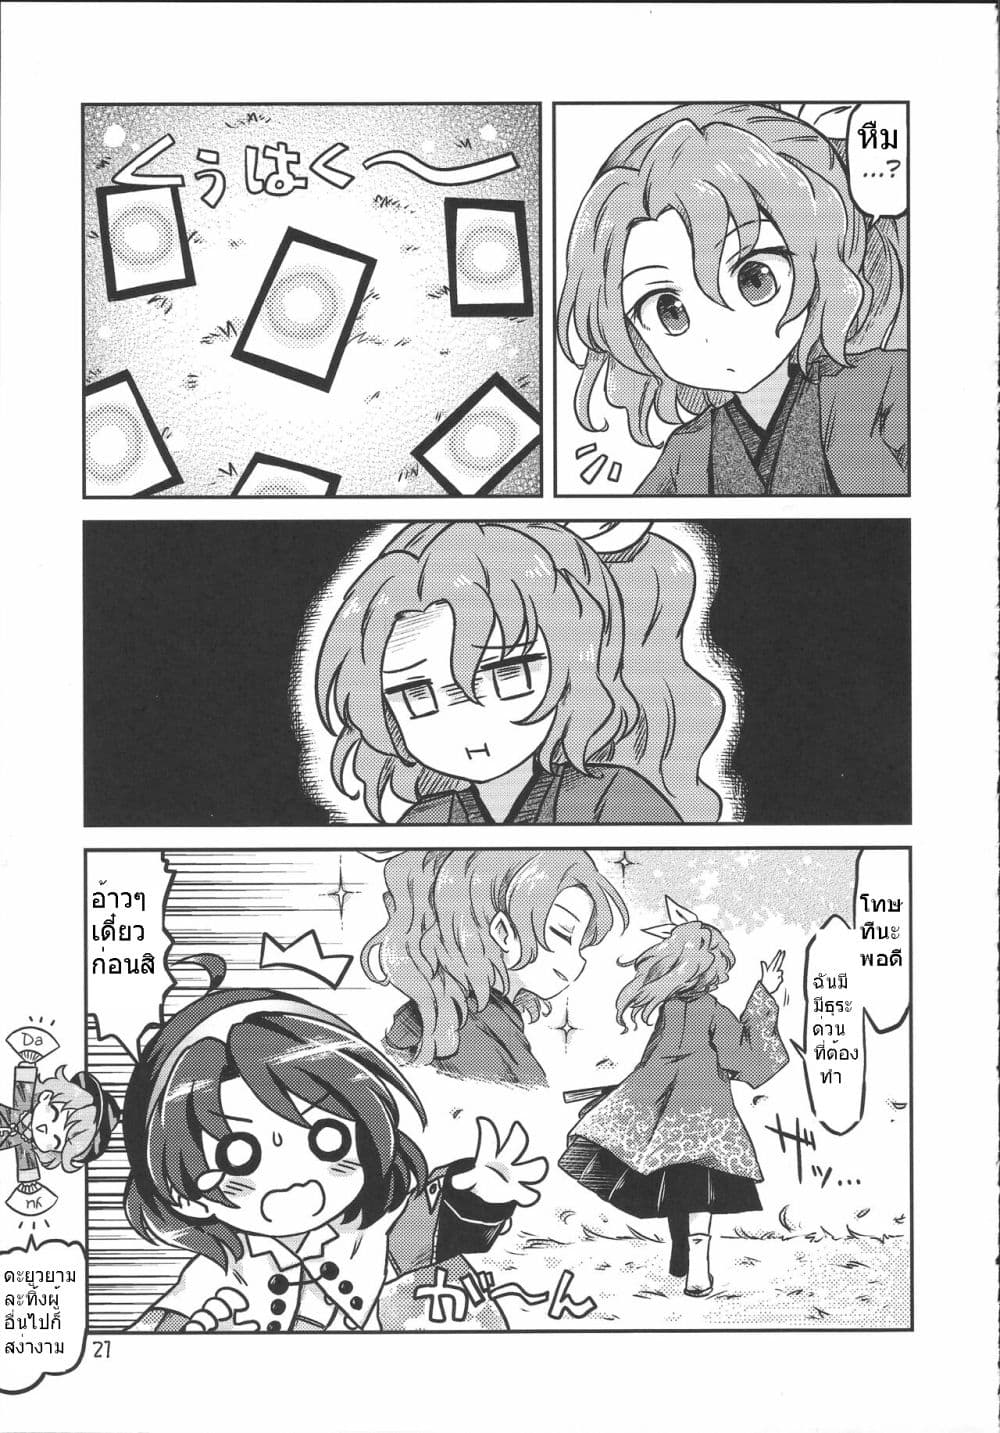 Touhou Project Chima Book By Pote ตอนที่ 1 (20)